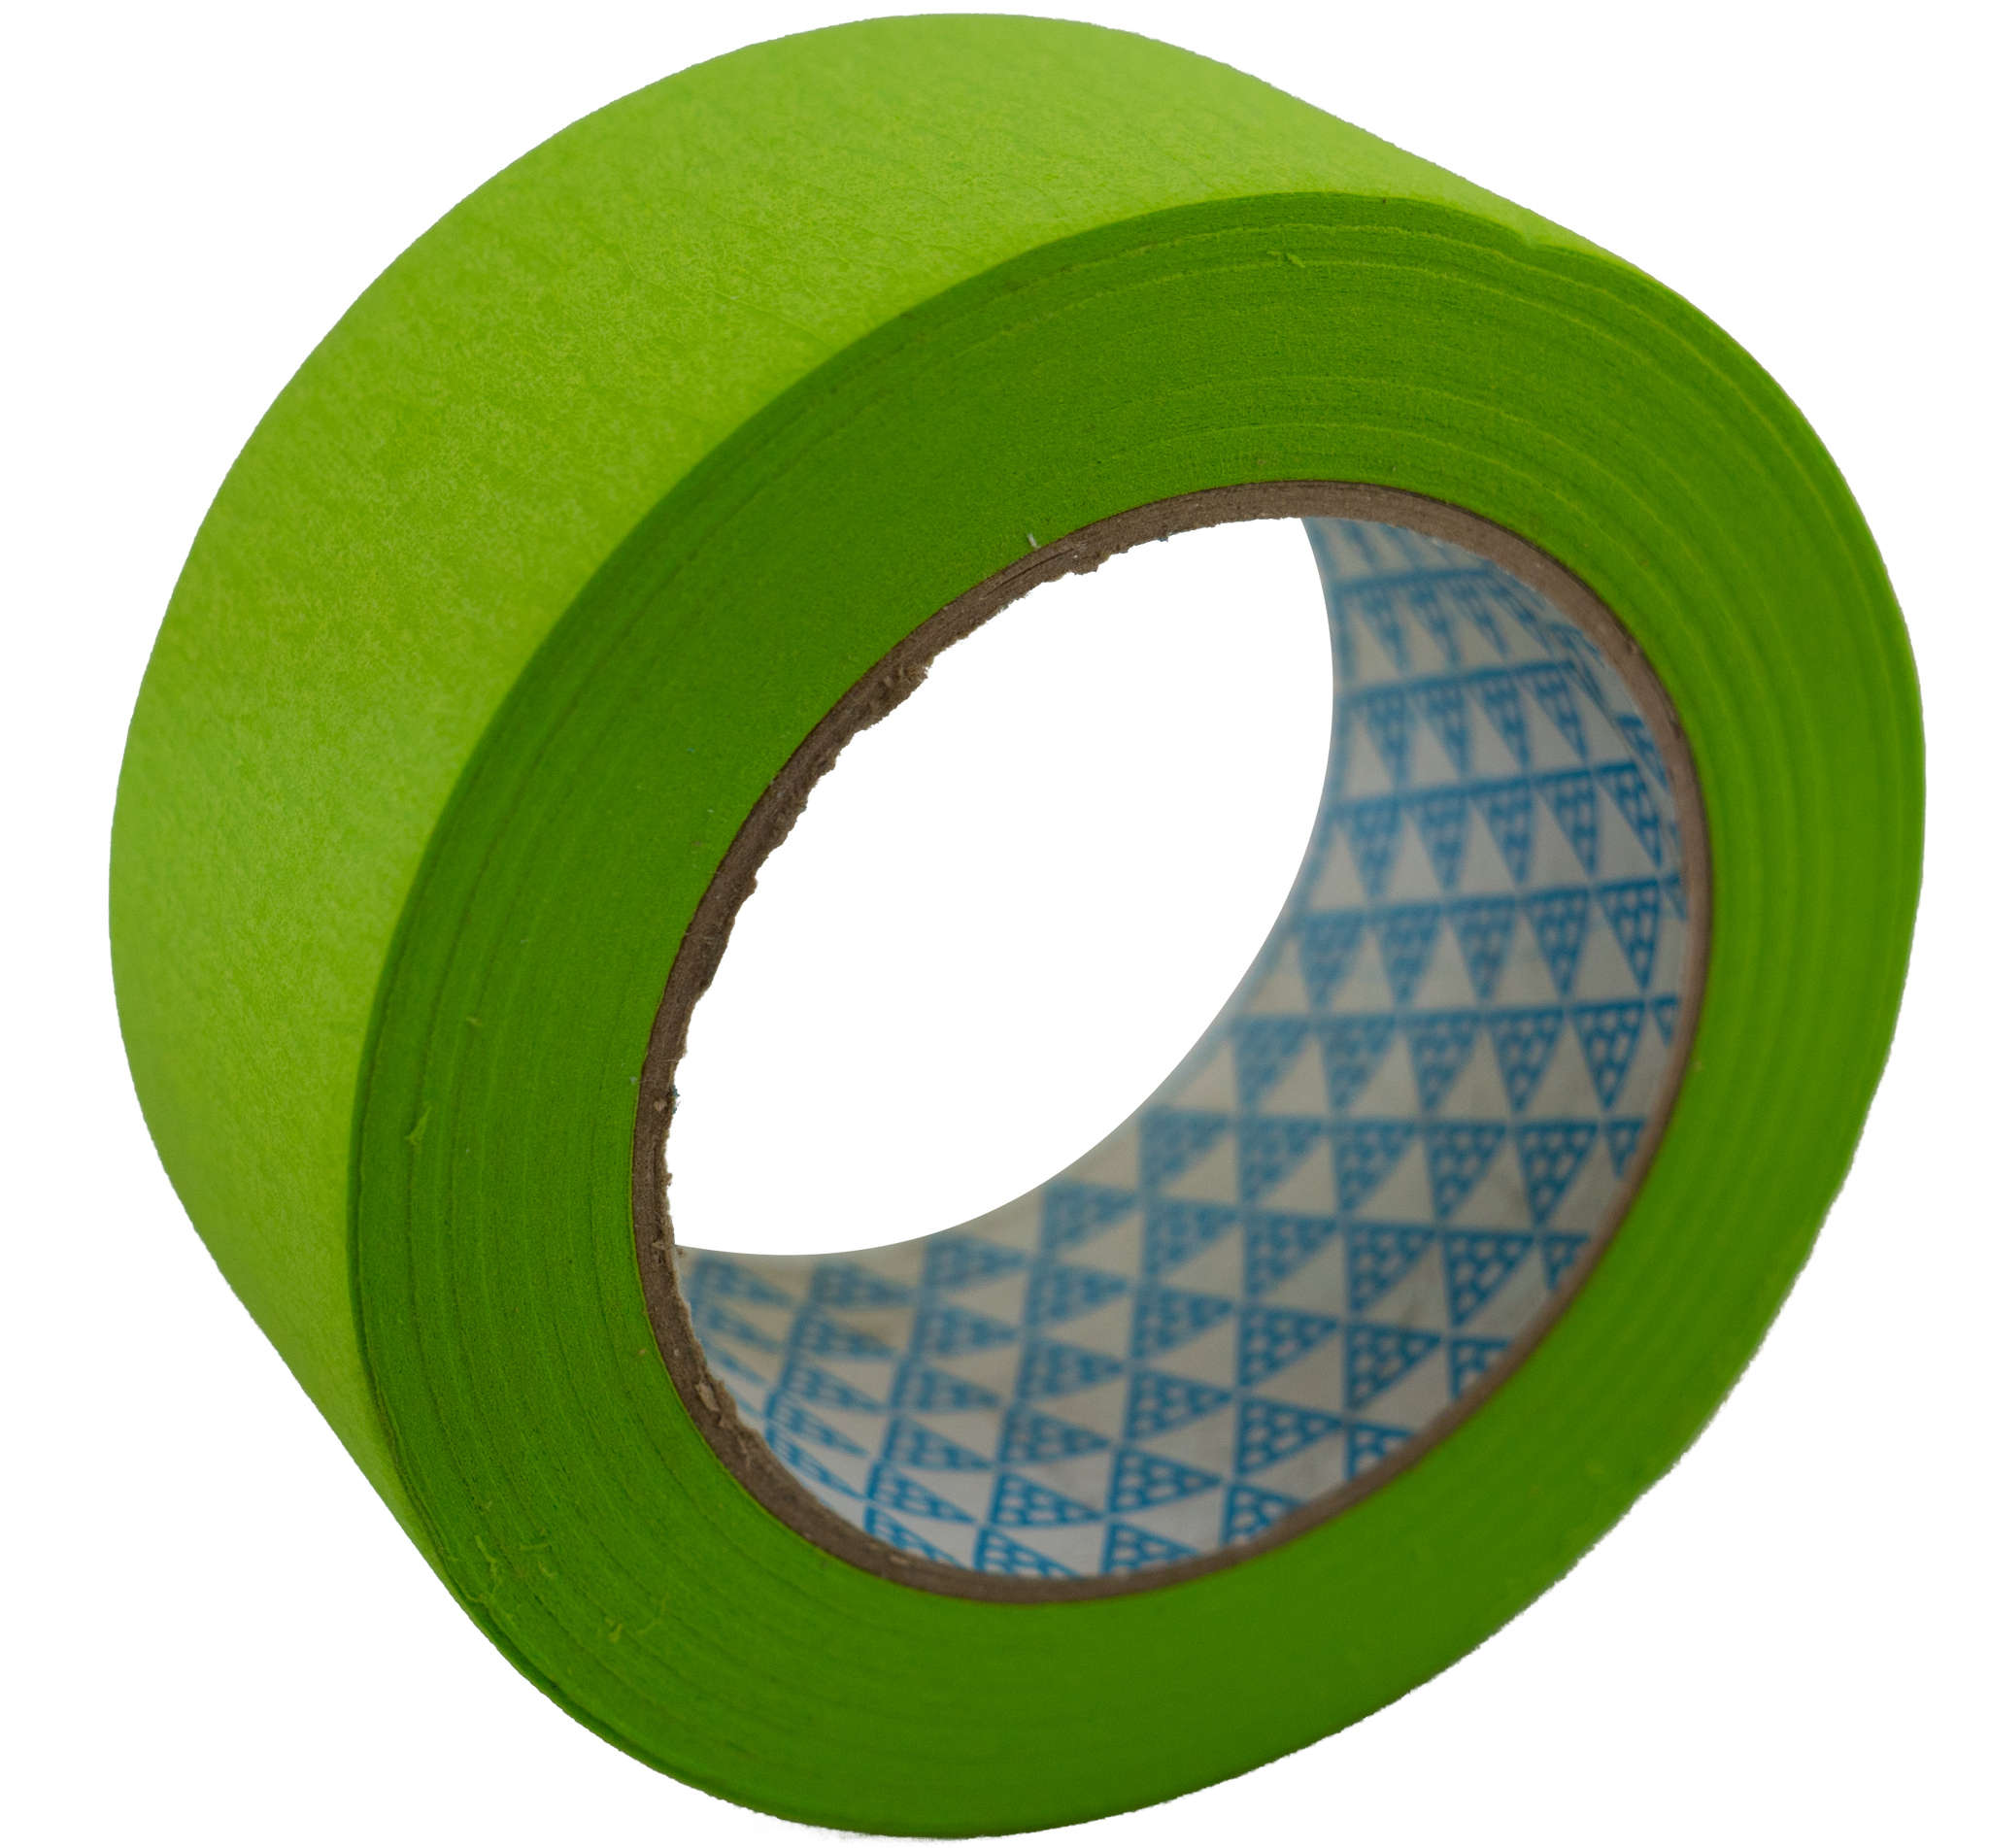 Low Tack Green Tape - 48mm - Pack of 15 Rolls ($6.00ea)